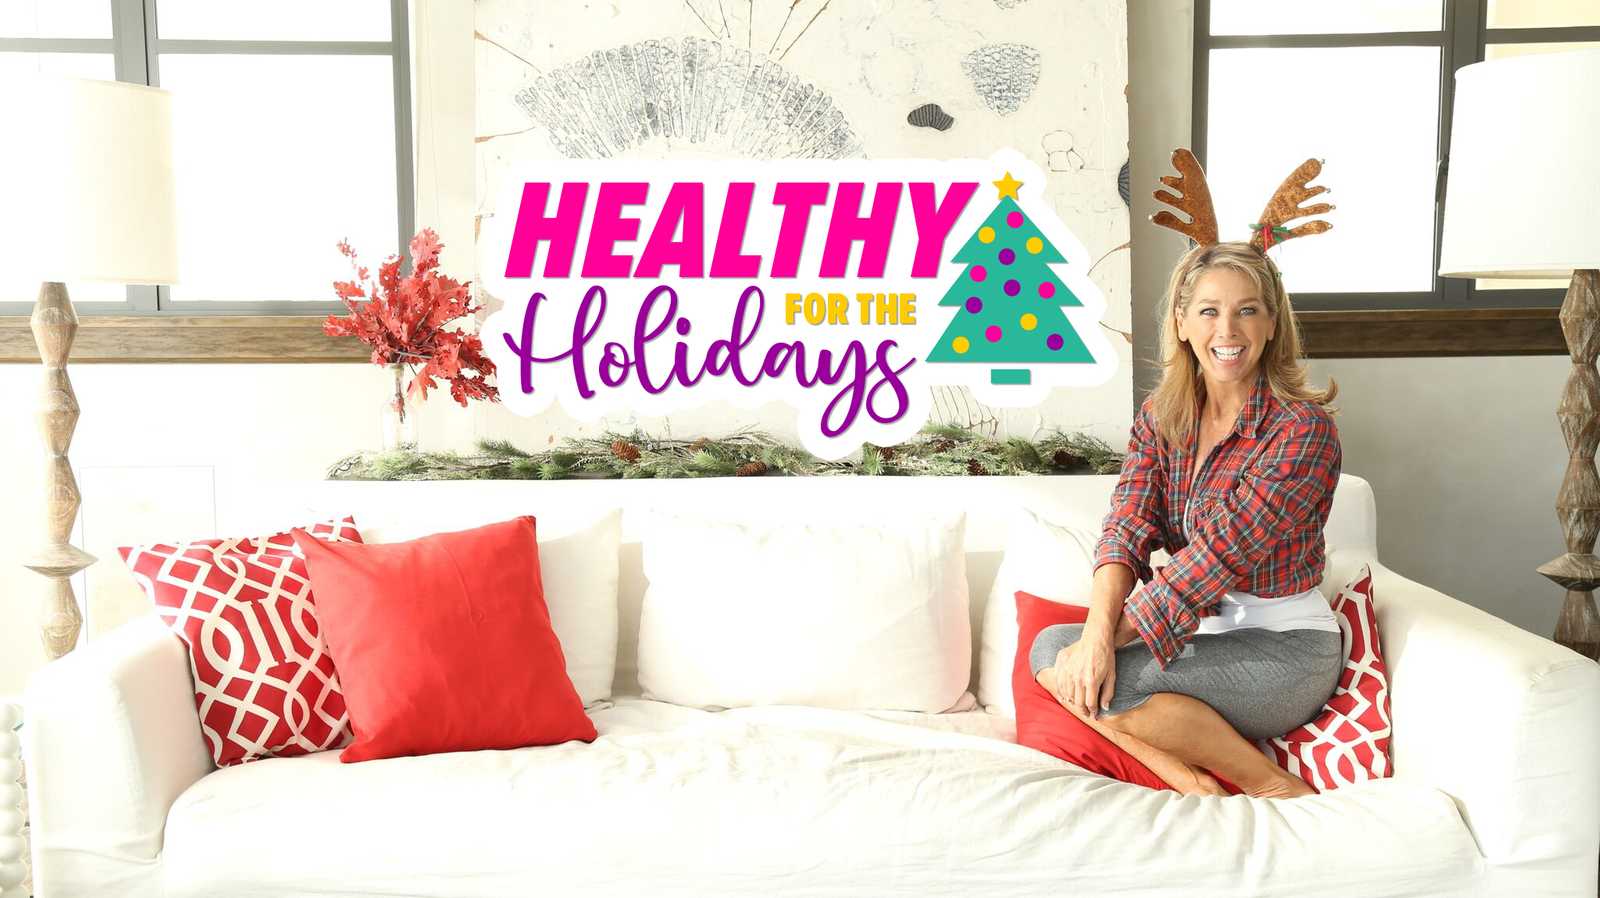 Let's Stay Healthy During the Holidays!